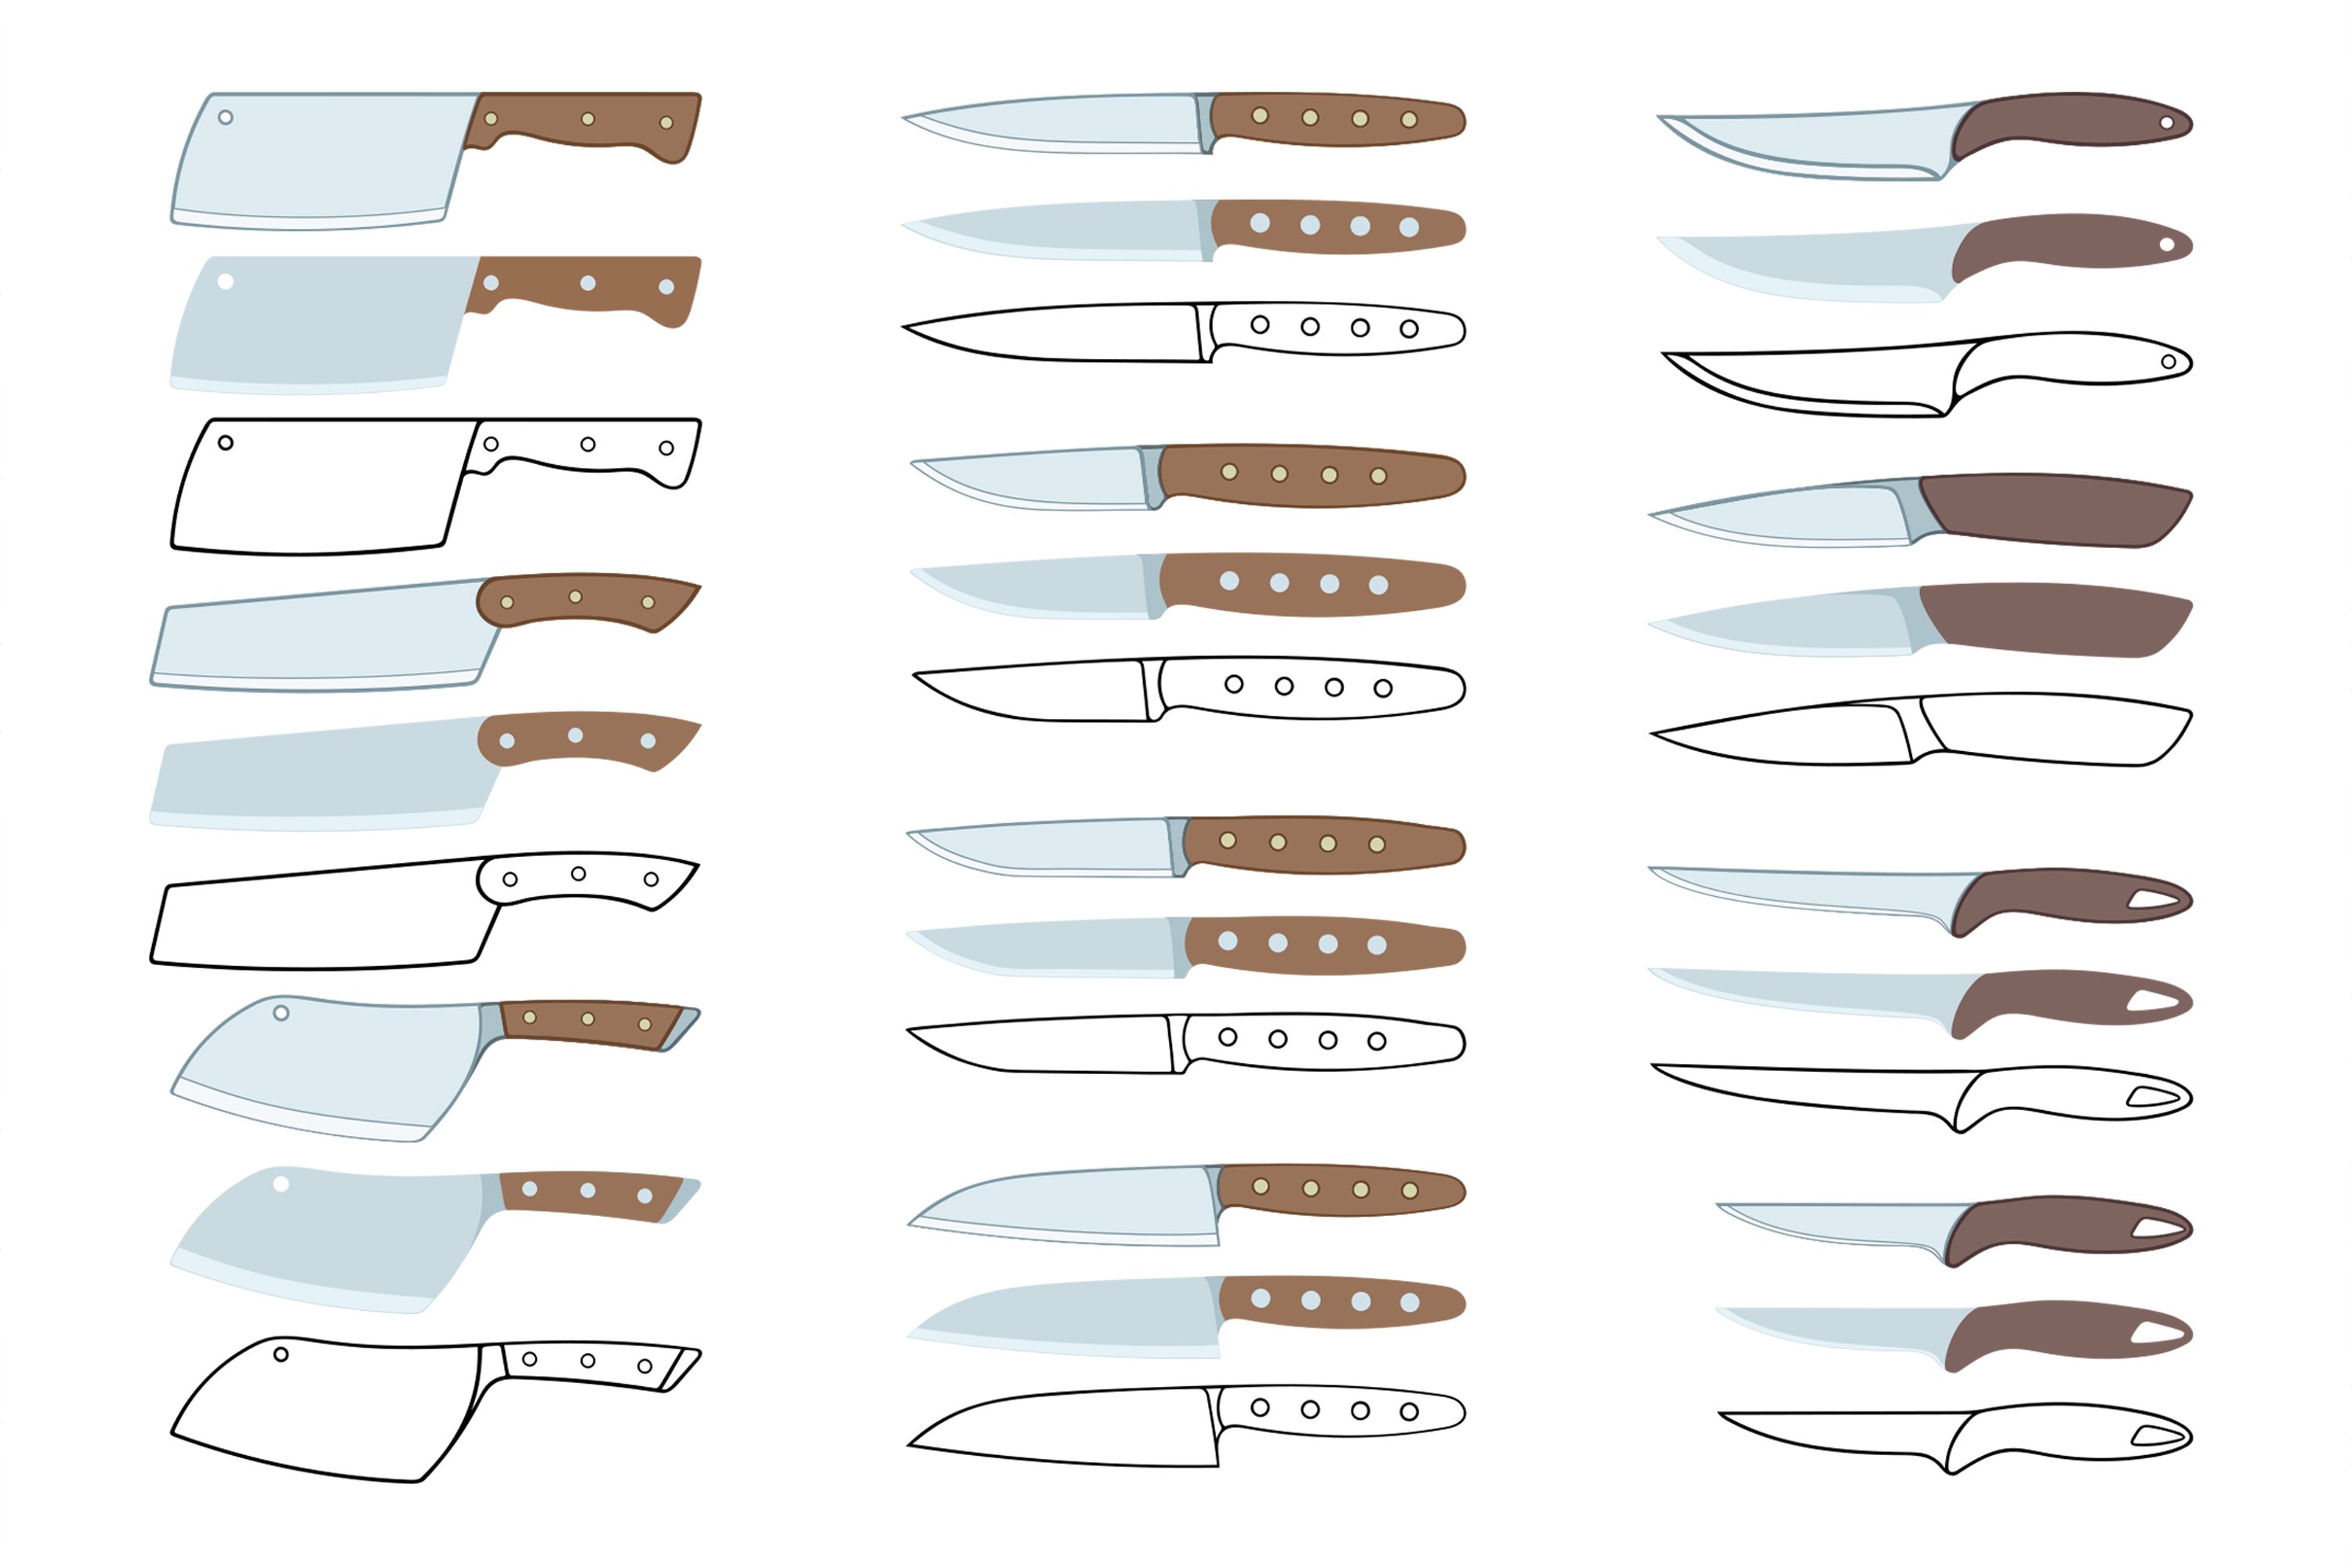 20 types of kitchen knives preview image.